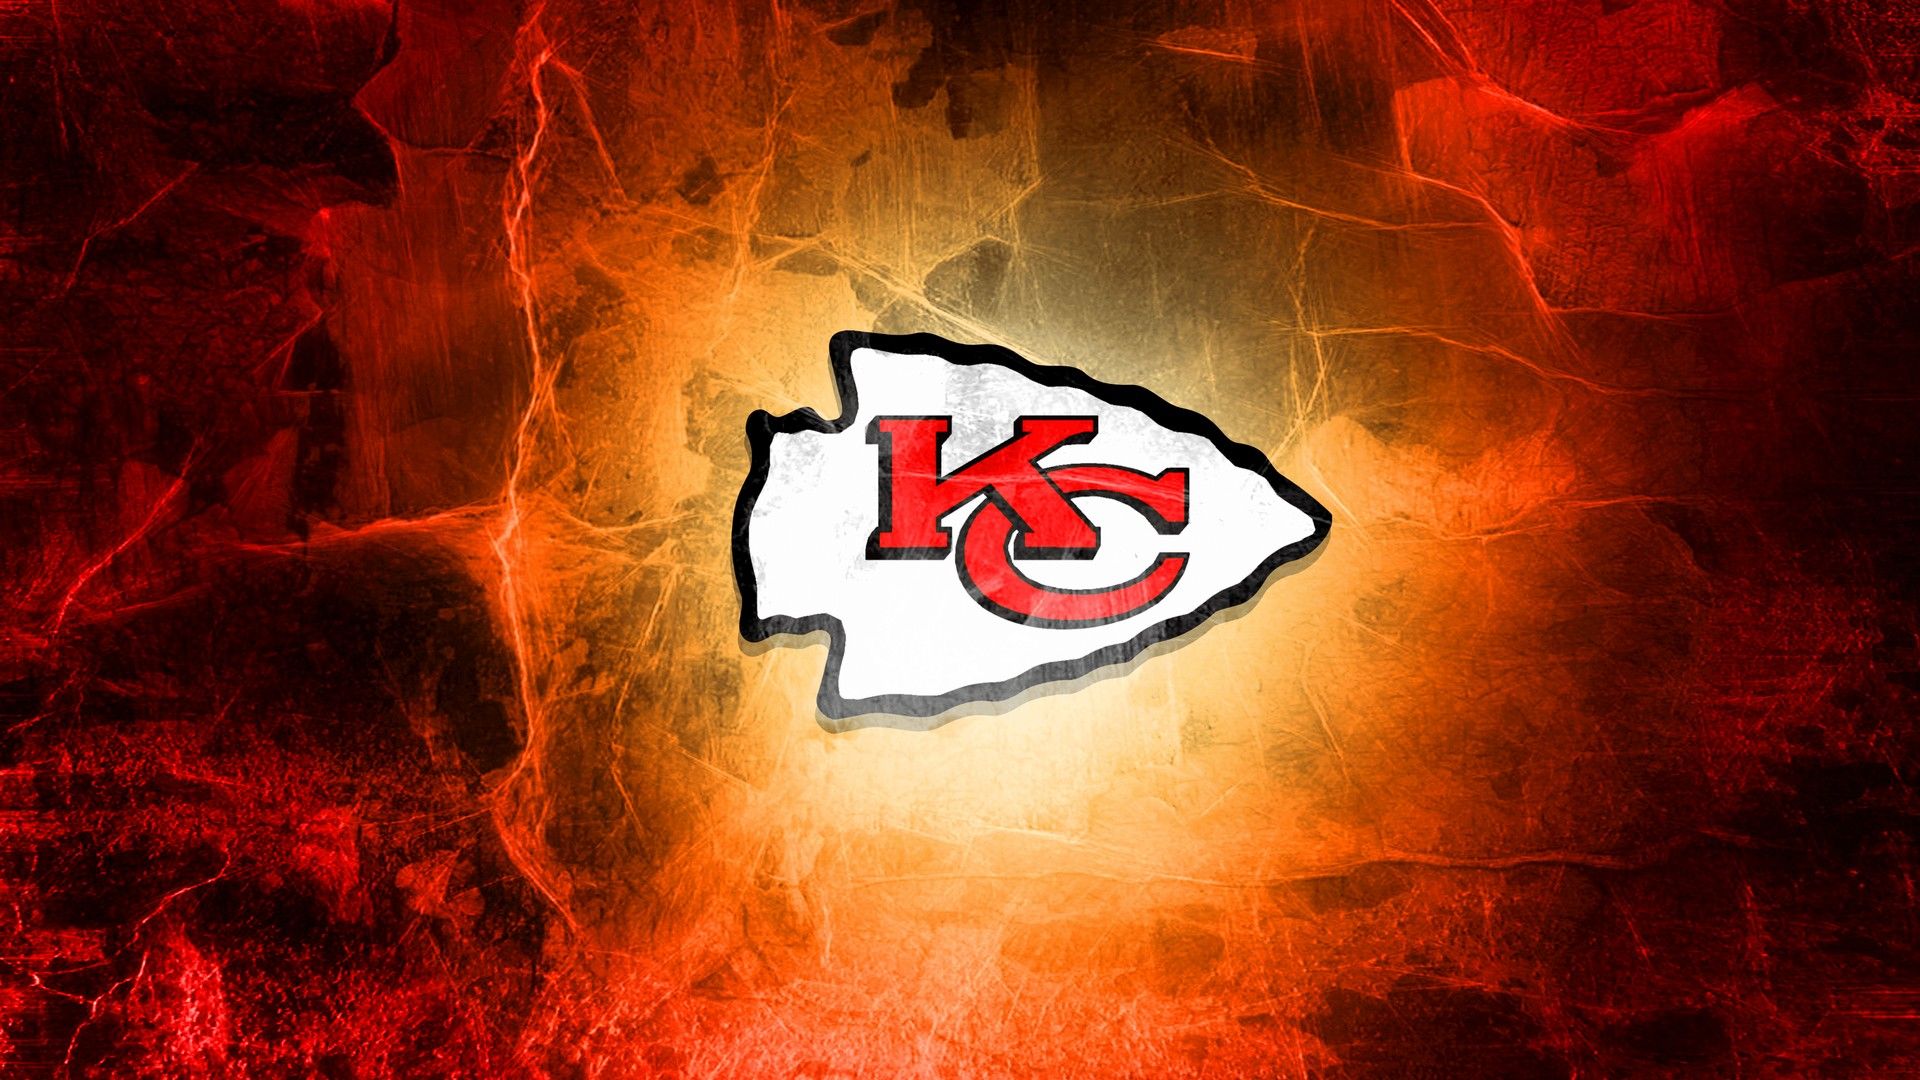 Chiefs Nfl Wallpapers - Wallpaper Cave